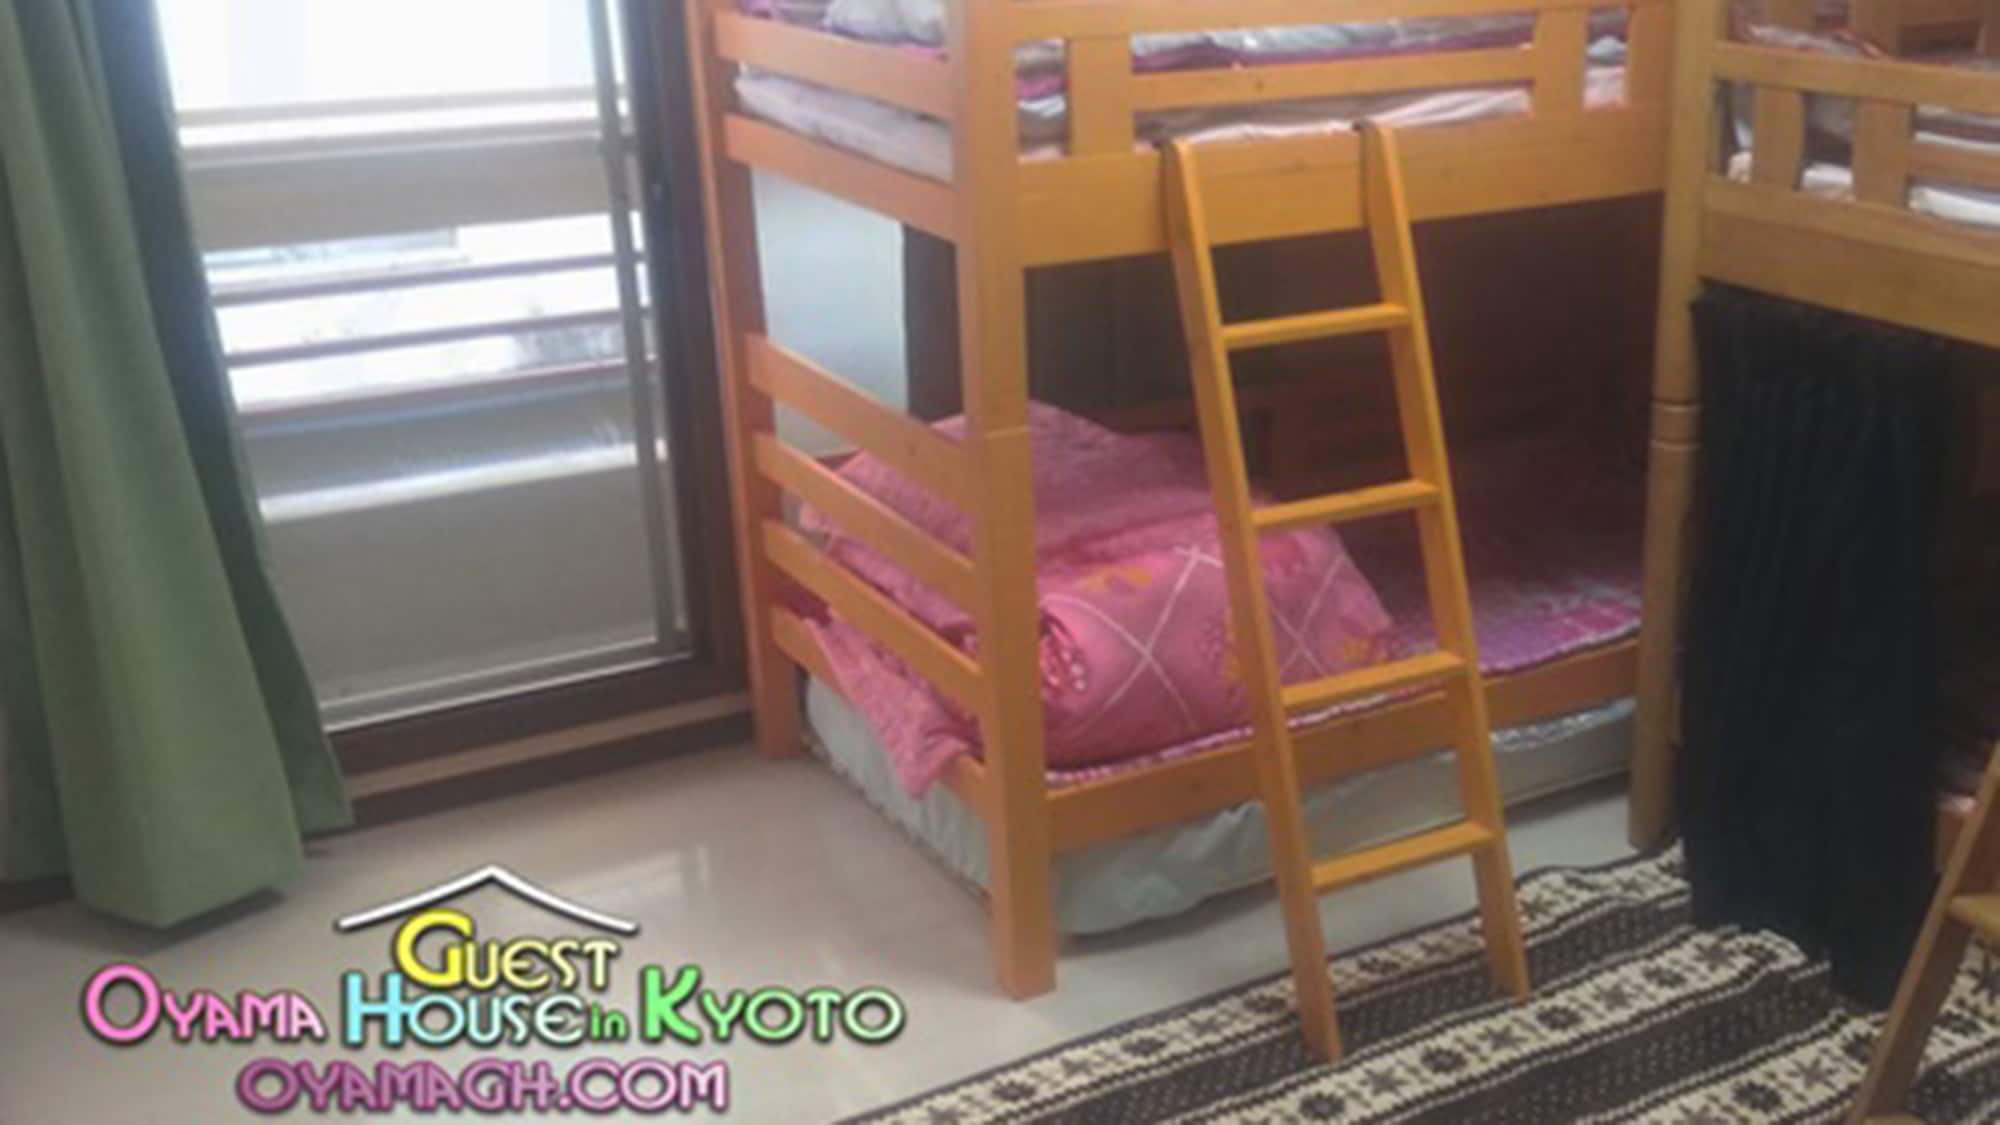 ・ A room for up to 4 people with 2 bunk beds!